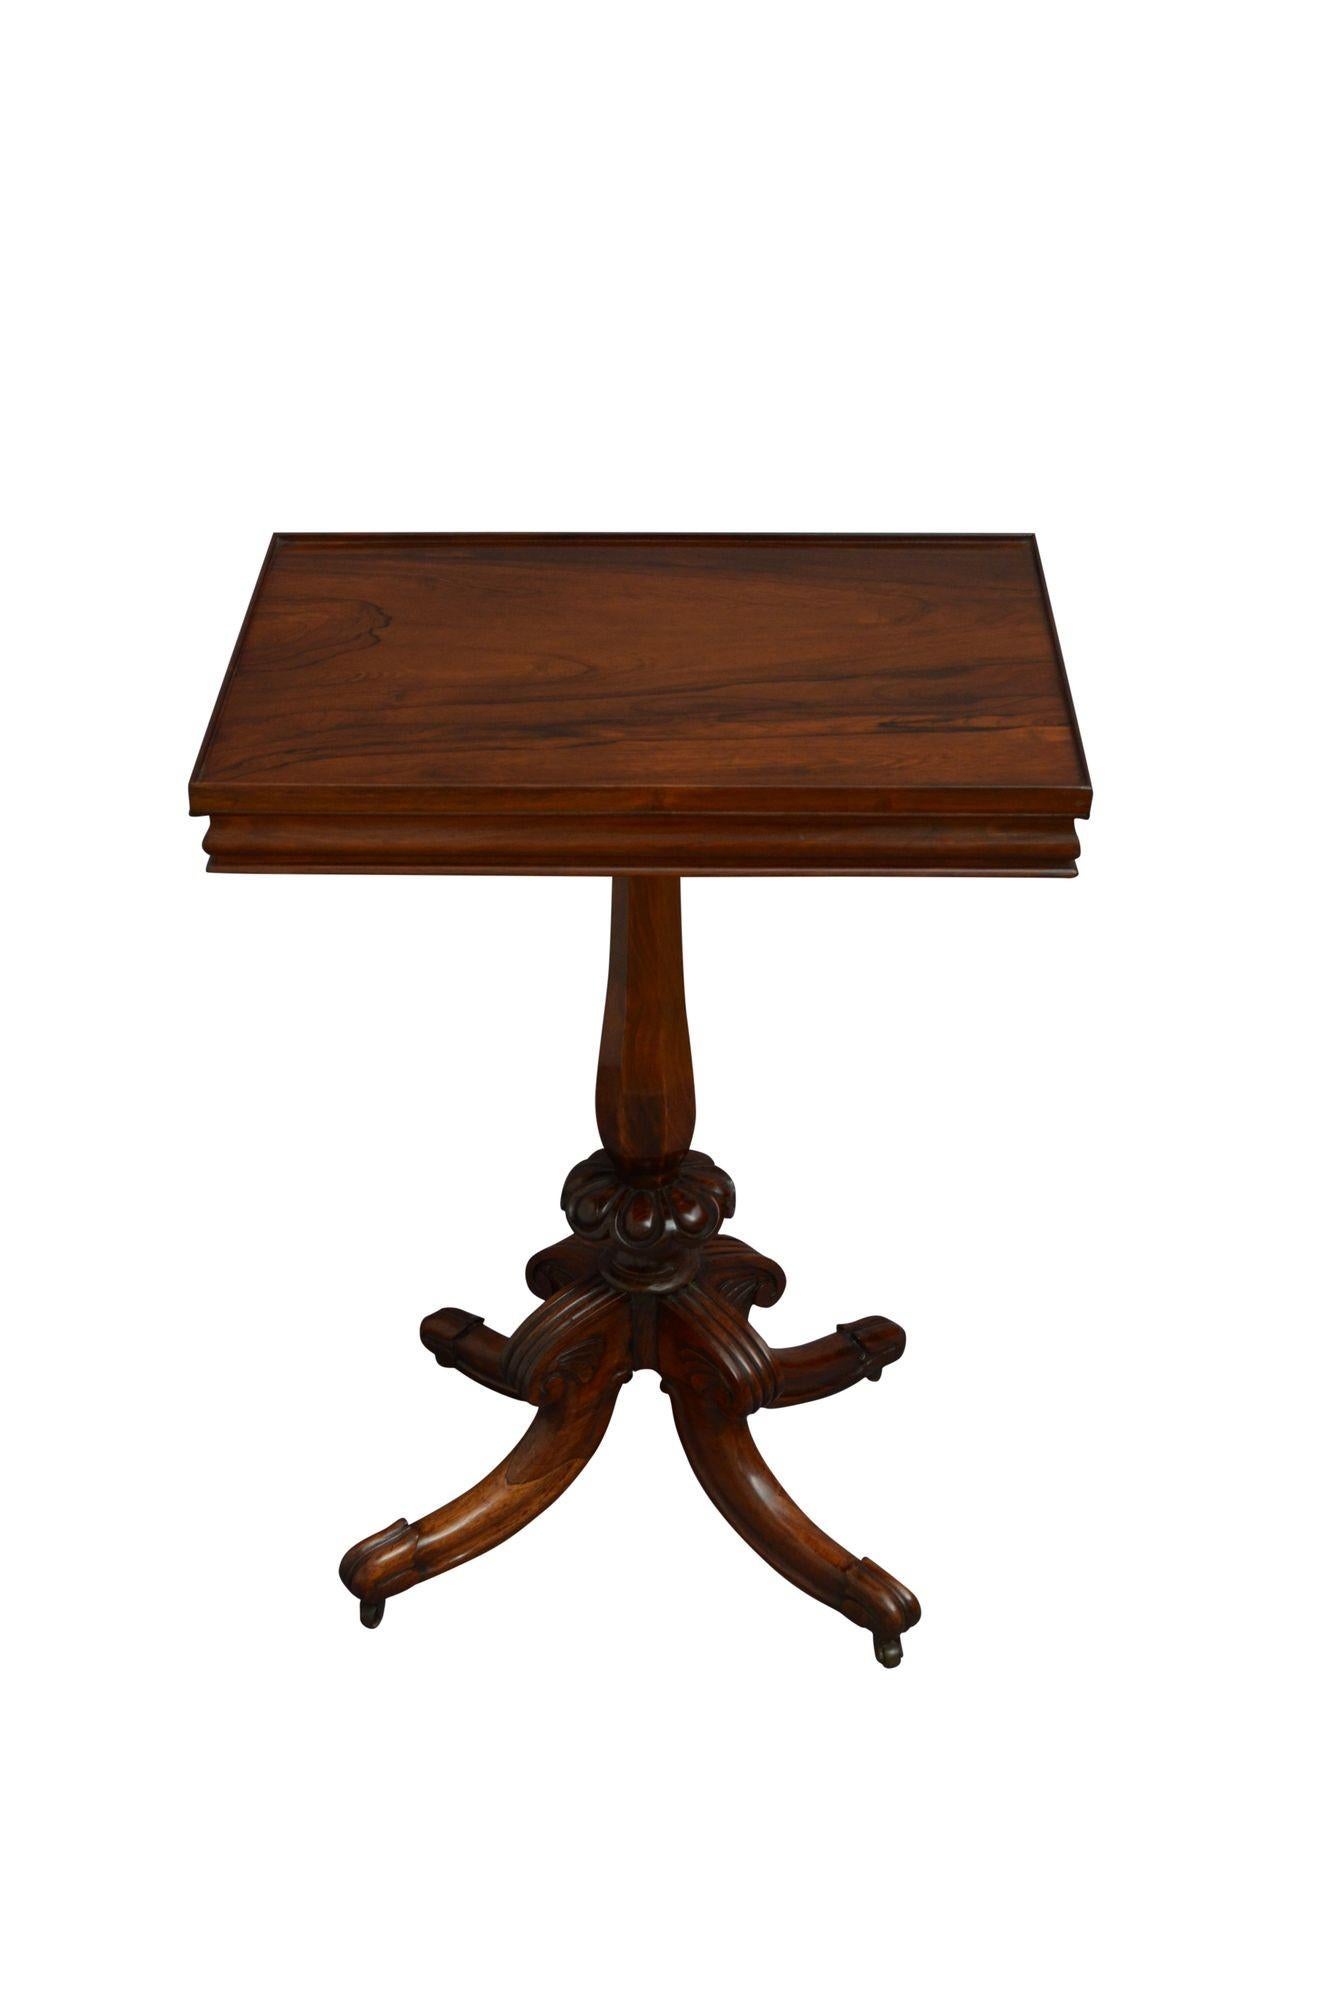 Fine English Regency Rosewood Side Table In Good Condition For Sale In Whaley Bridge, GB